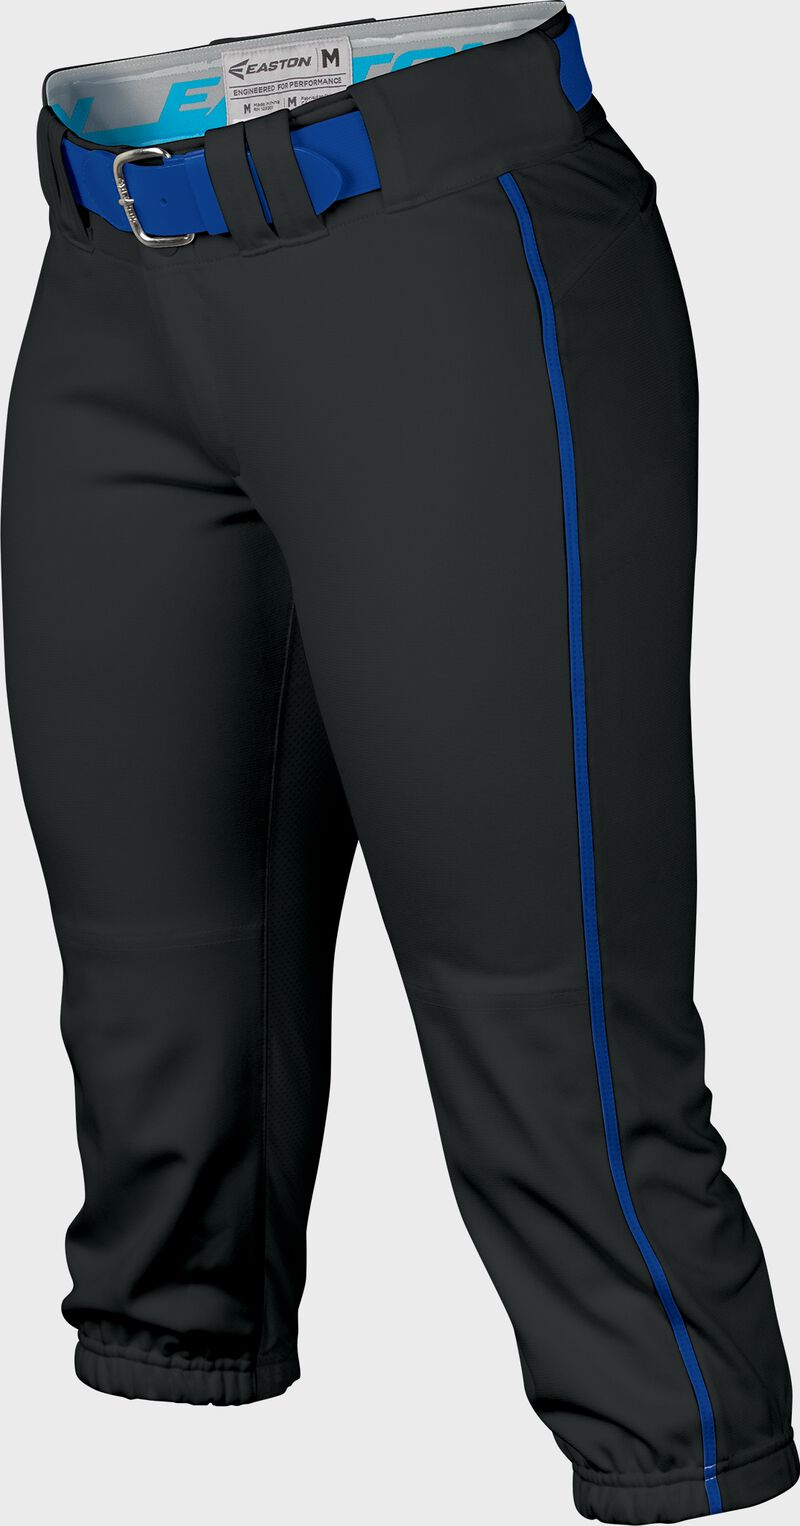 Easton Prowess Softball Pant Women's Piped BLACK/ROYAL  XS